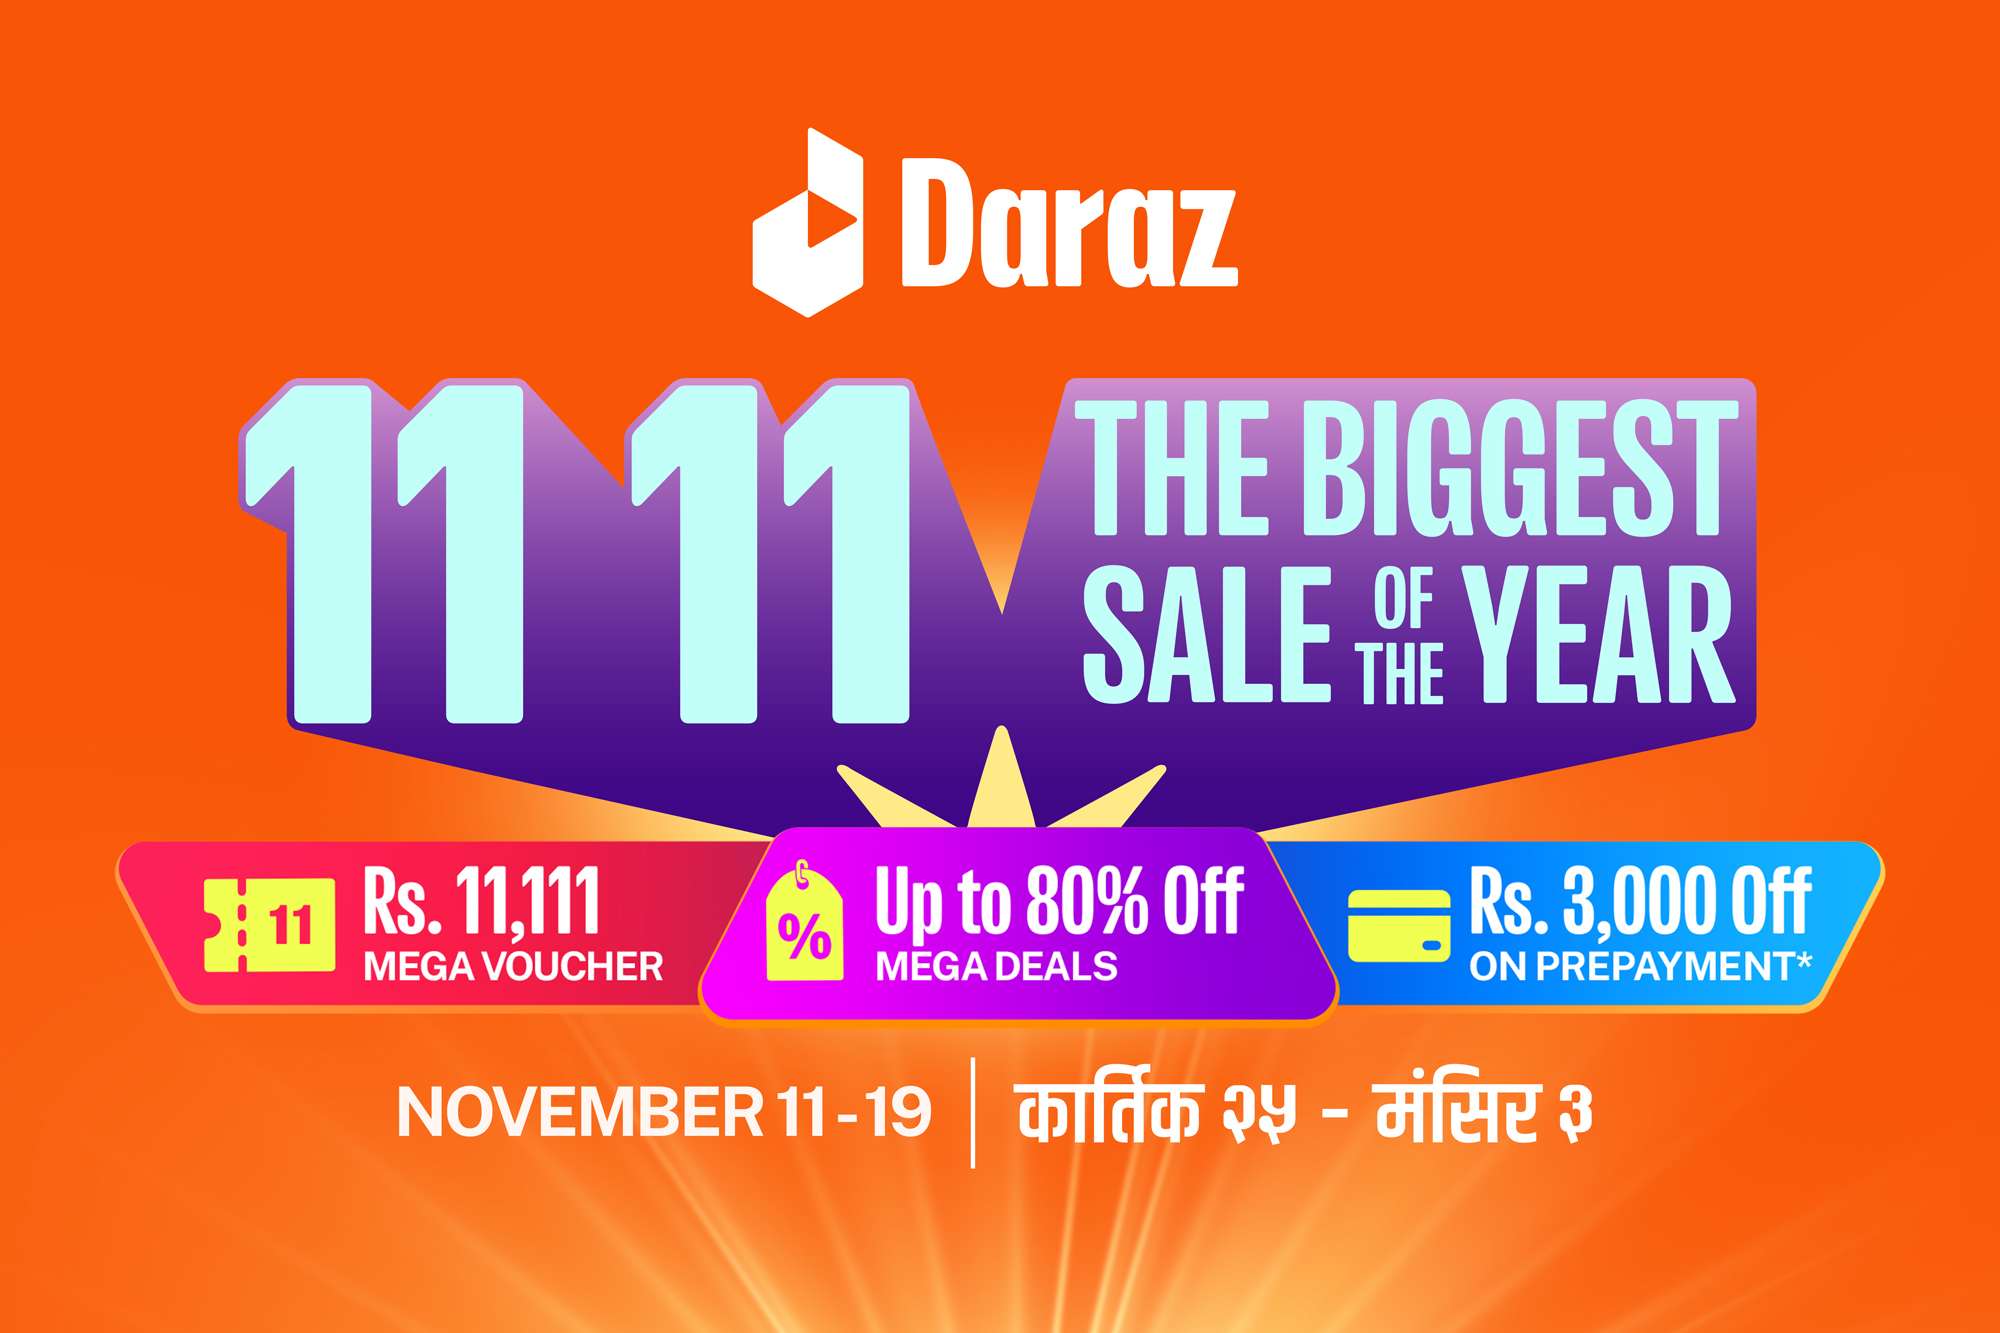 Daraz announces sale of the year up to 80% off, mega vouchers up to Rs 11,111 - myRepublica